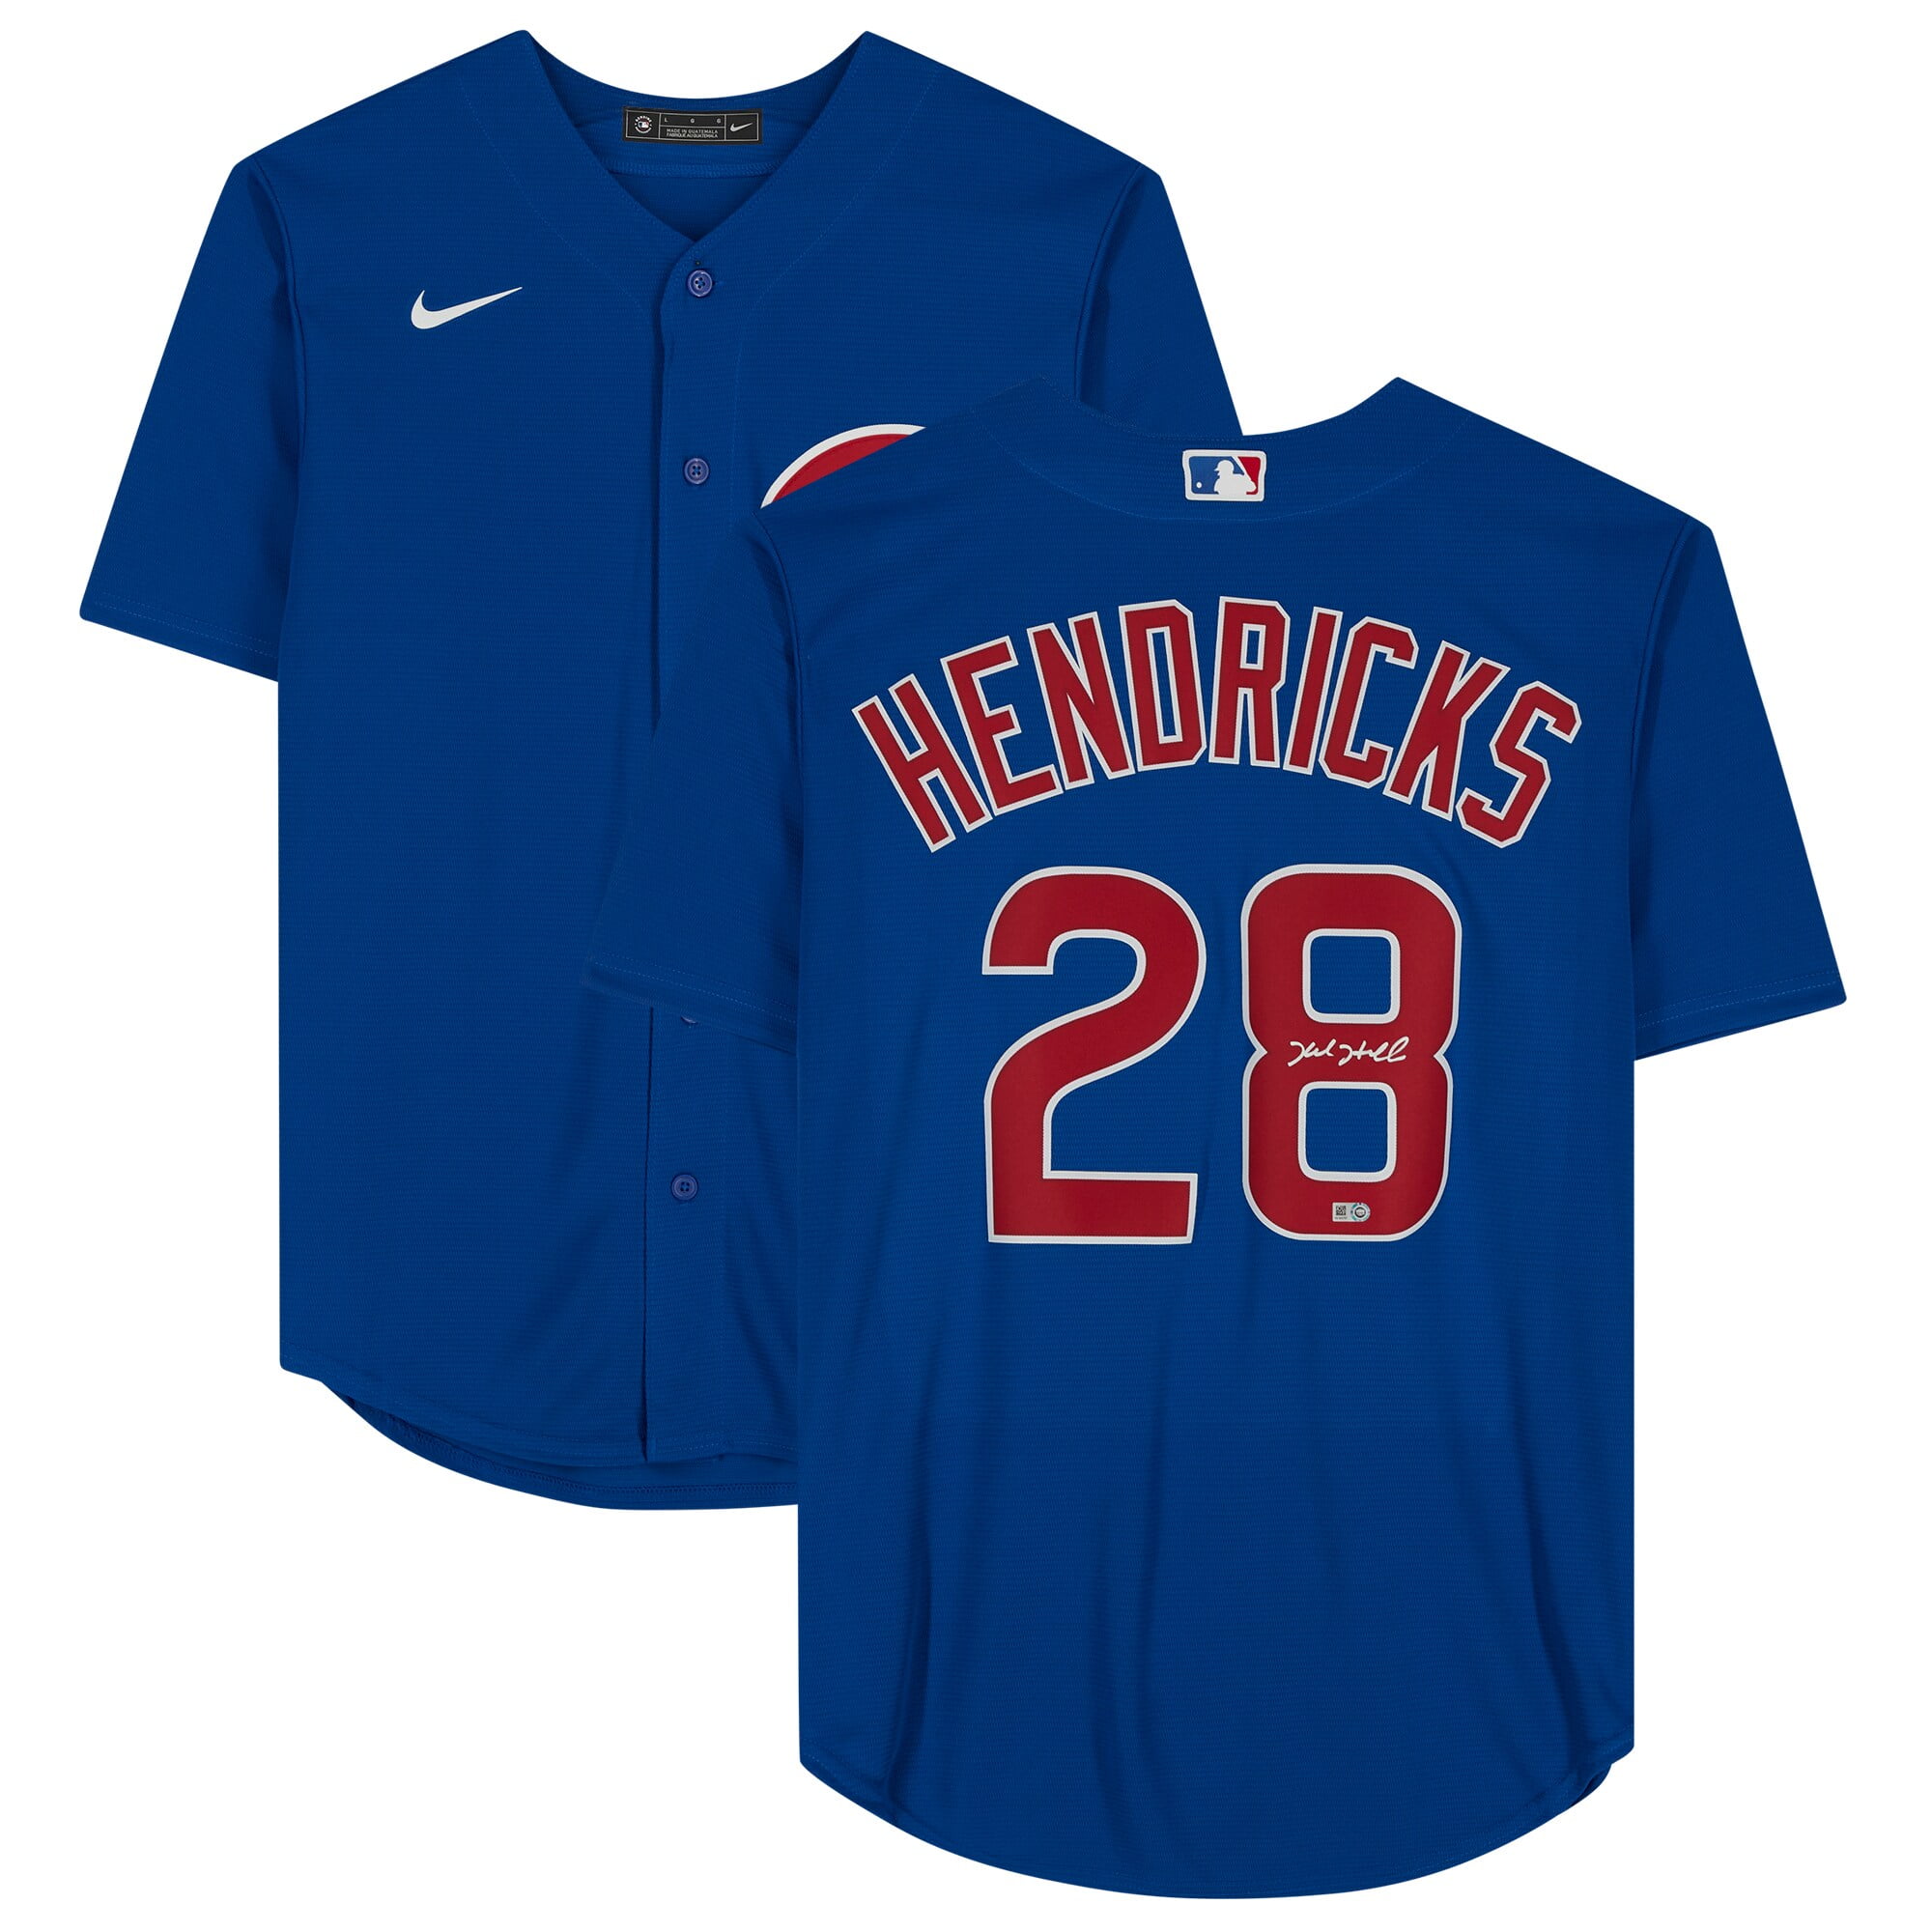 Youth Nike Navy Chicago Cubs City Connect Replica Jersey 